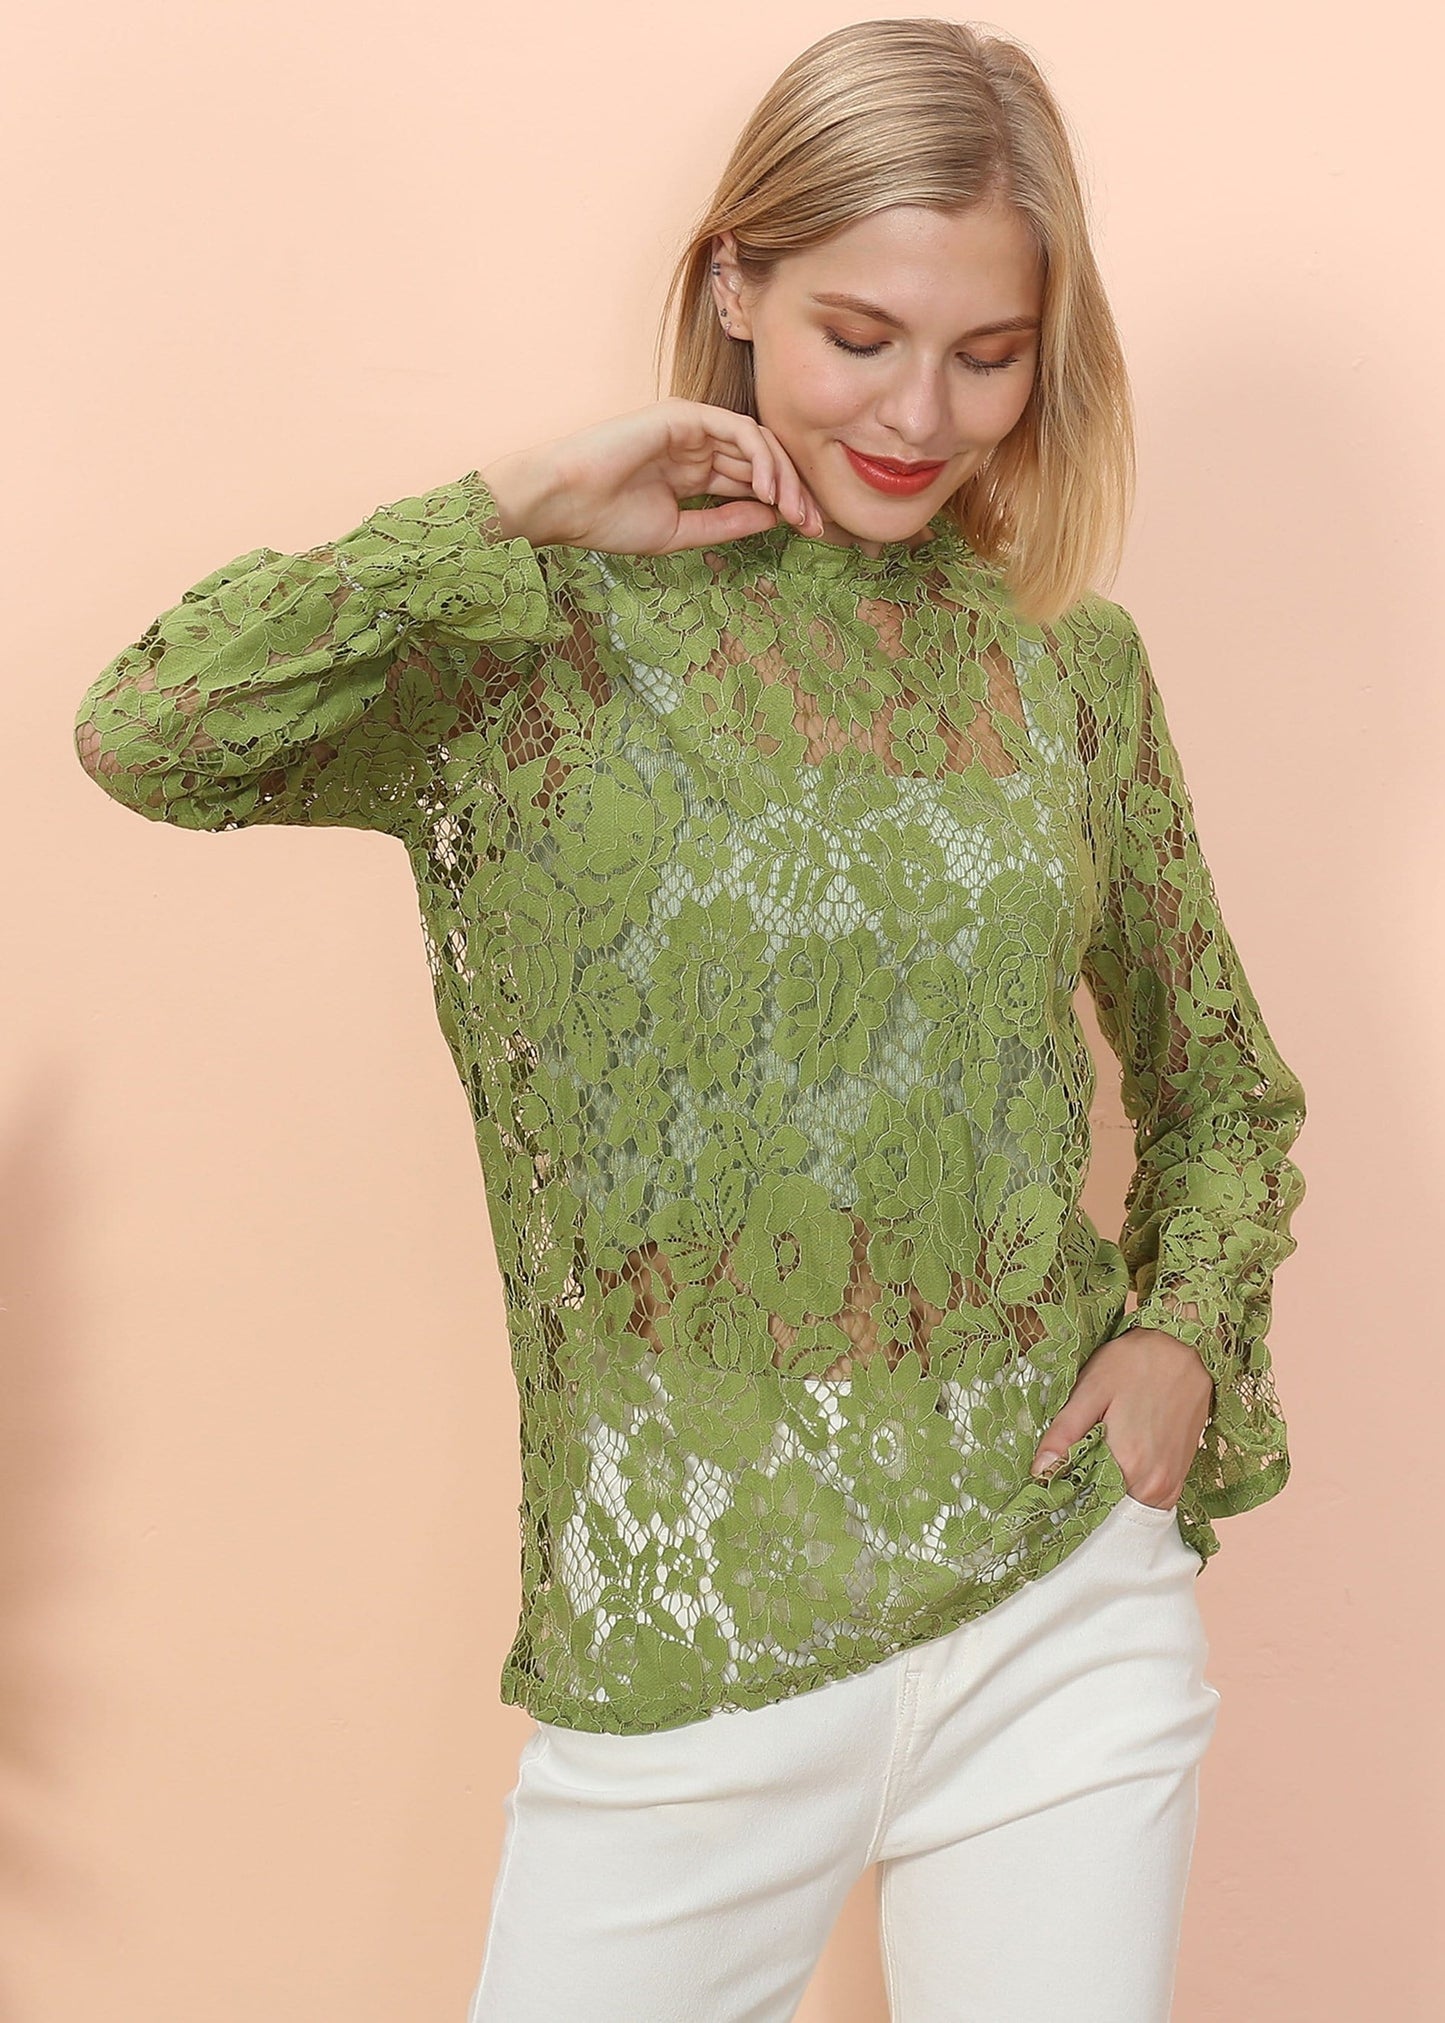 Layering Lace Puffed Sleeve Sheer Top